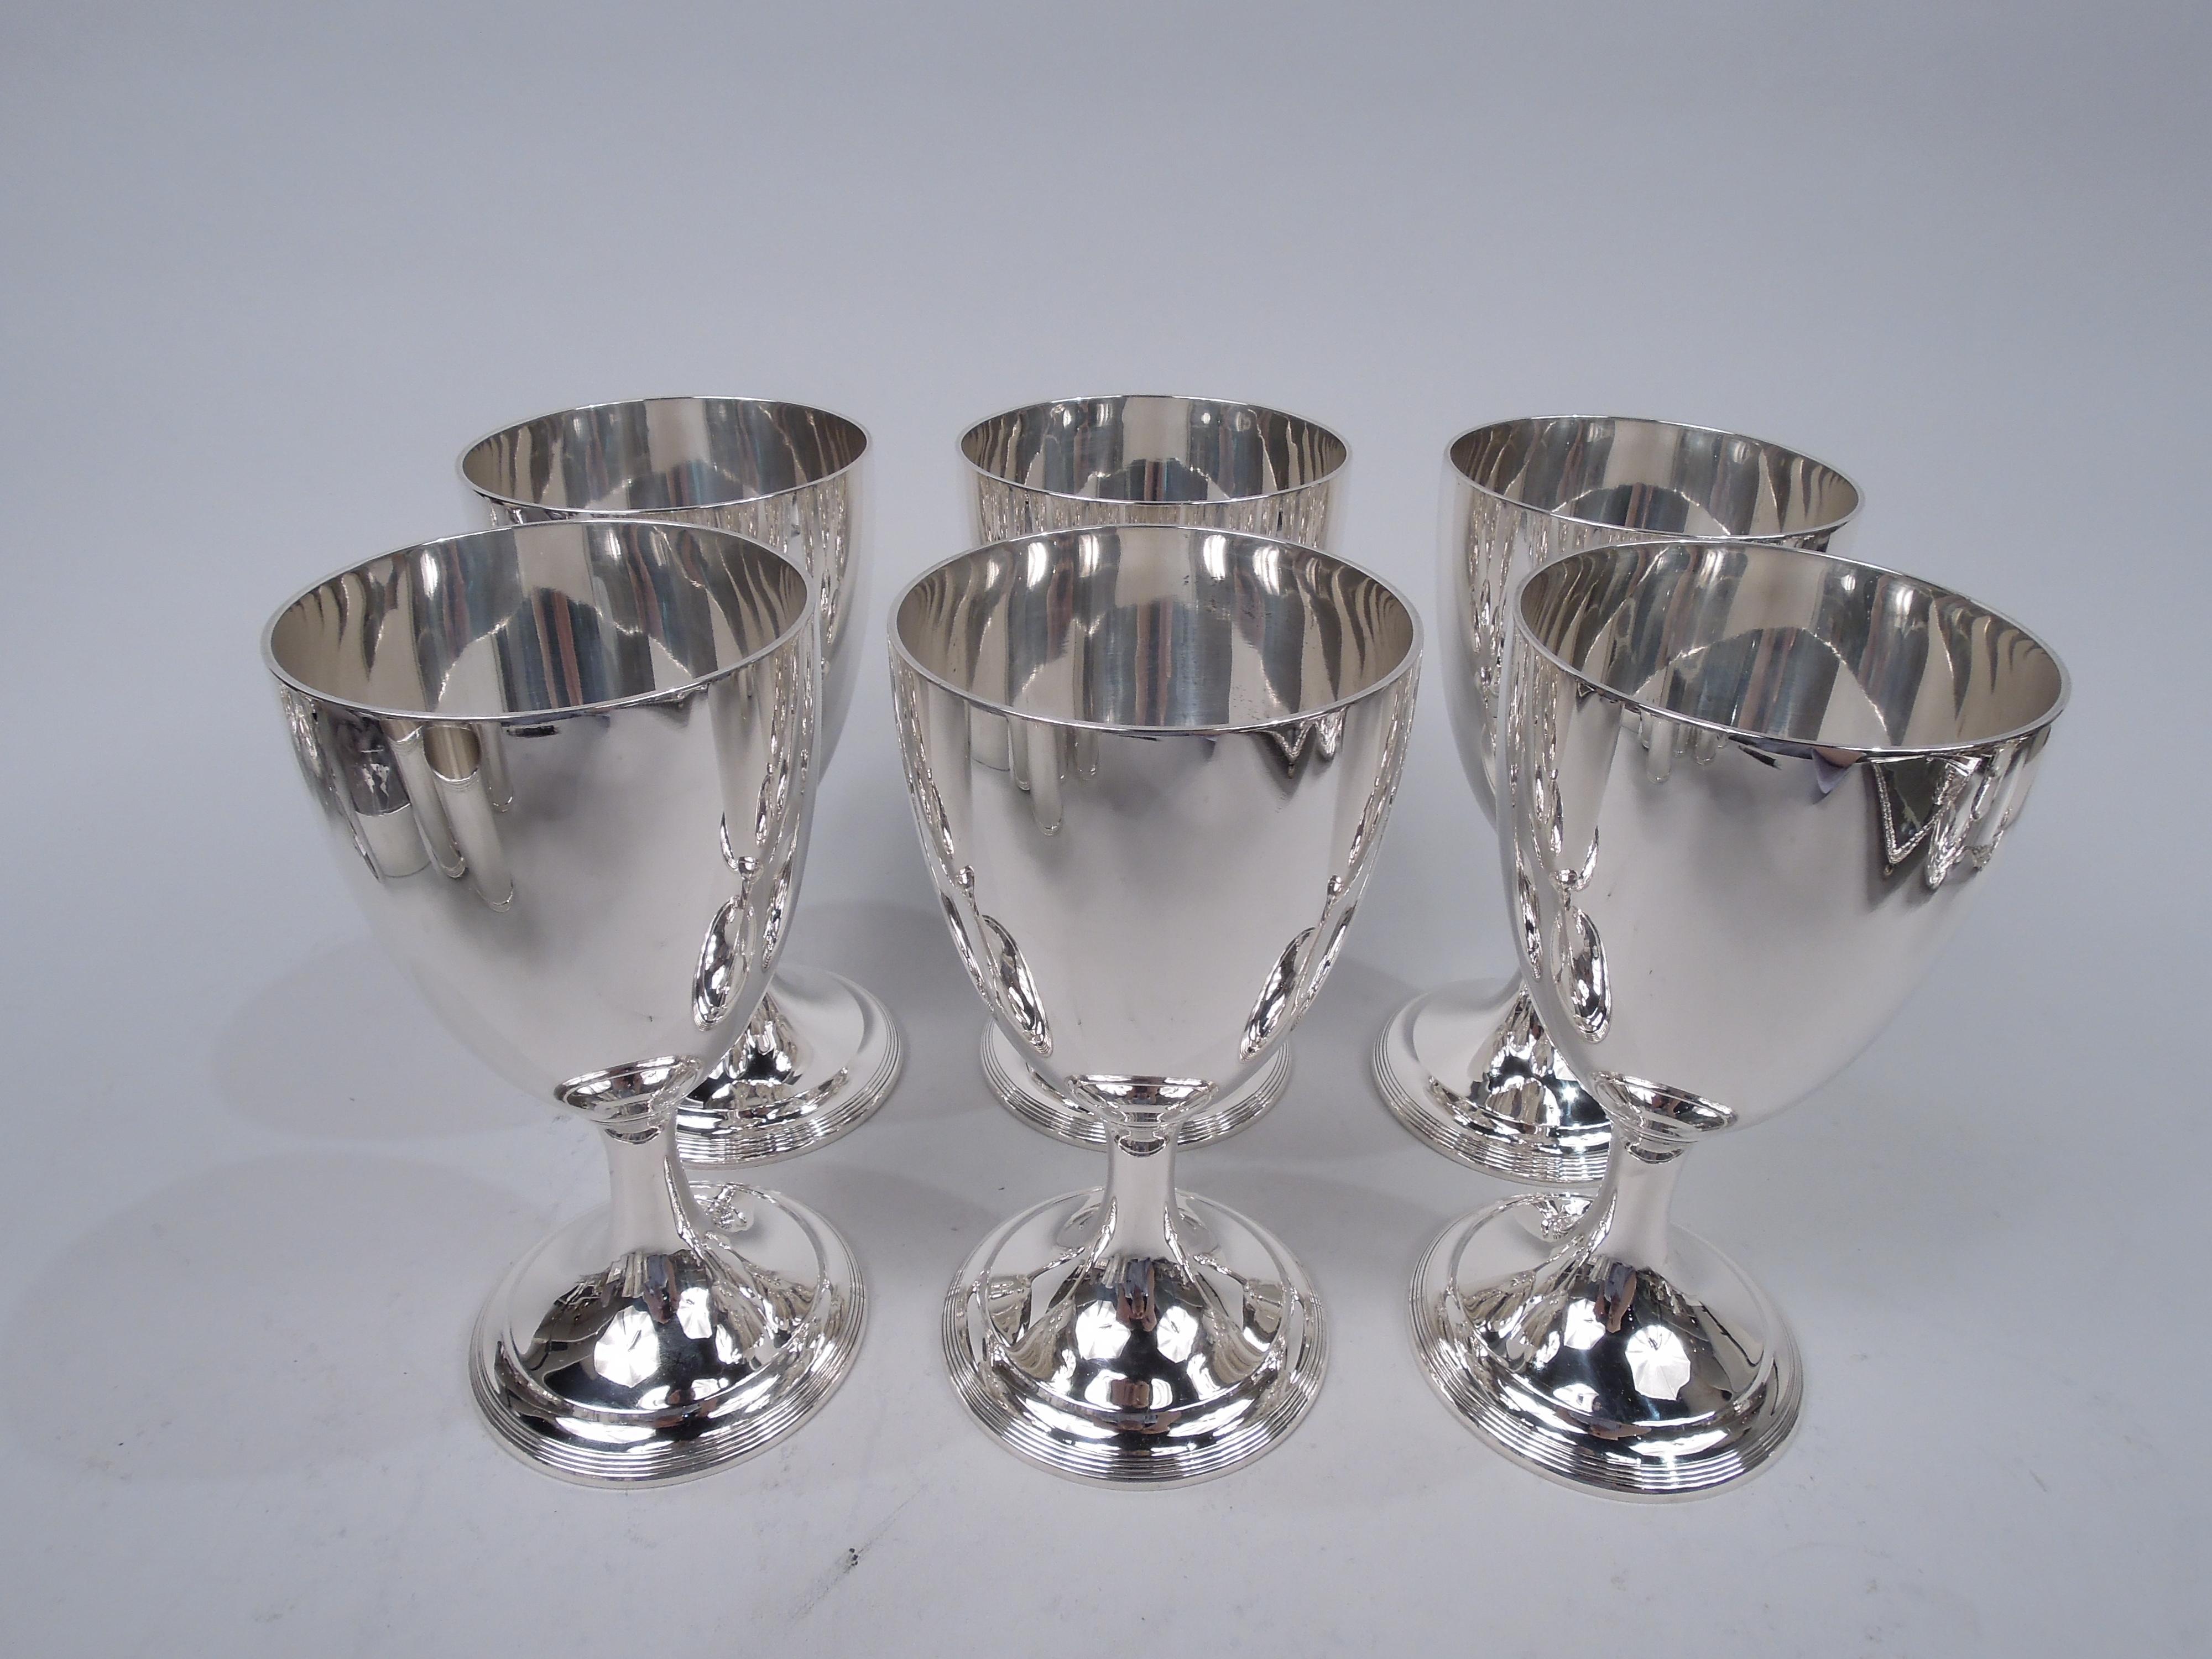 Set of 6 traditional Georgian Neoclassical sterling silver goblets. Made by Tiffany & Co. in New York, ca 1913. Each: Ovoid bowl on upward tapering stem flowing into domed and reeded foot. Fully marked including maker’s stamp, pattern no. 18548